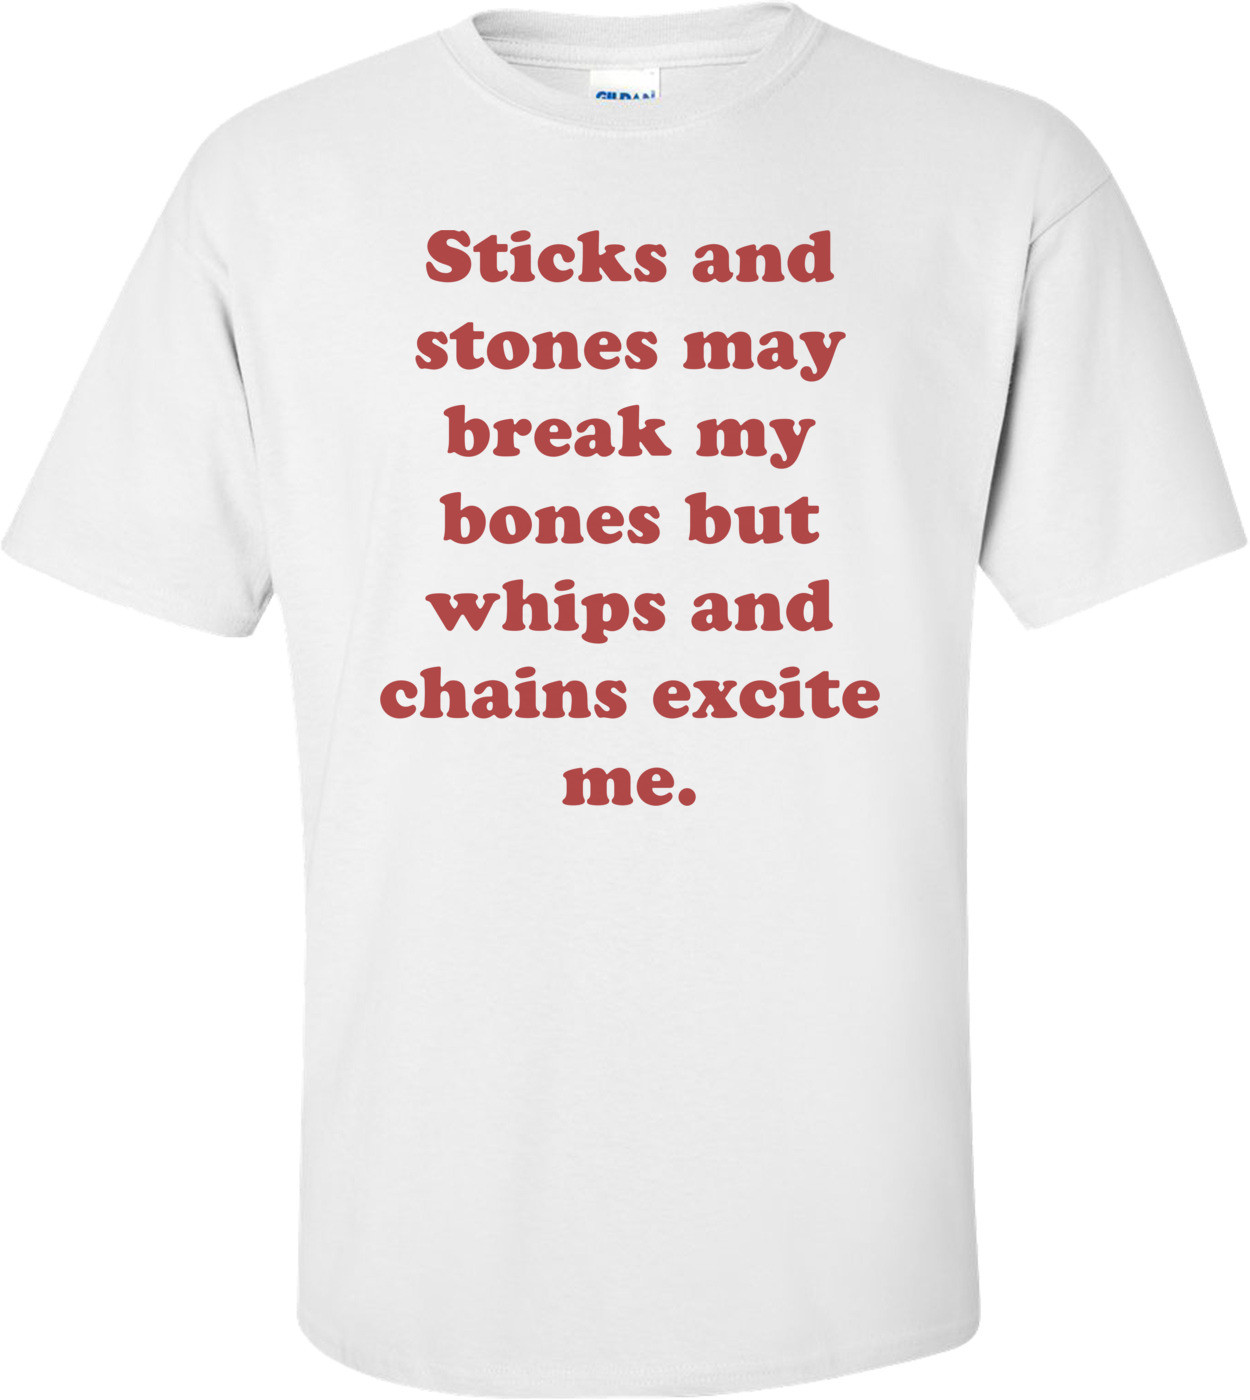 Sticks and stones may break my bones but whips and chains excite me.